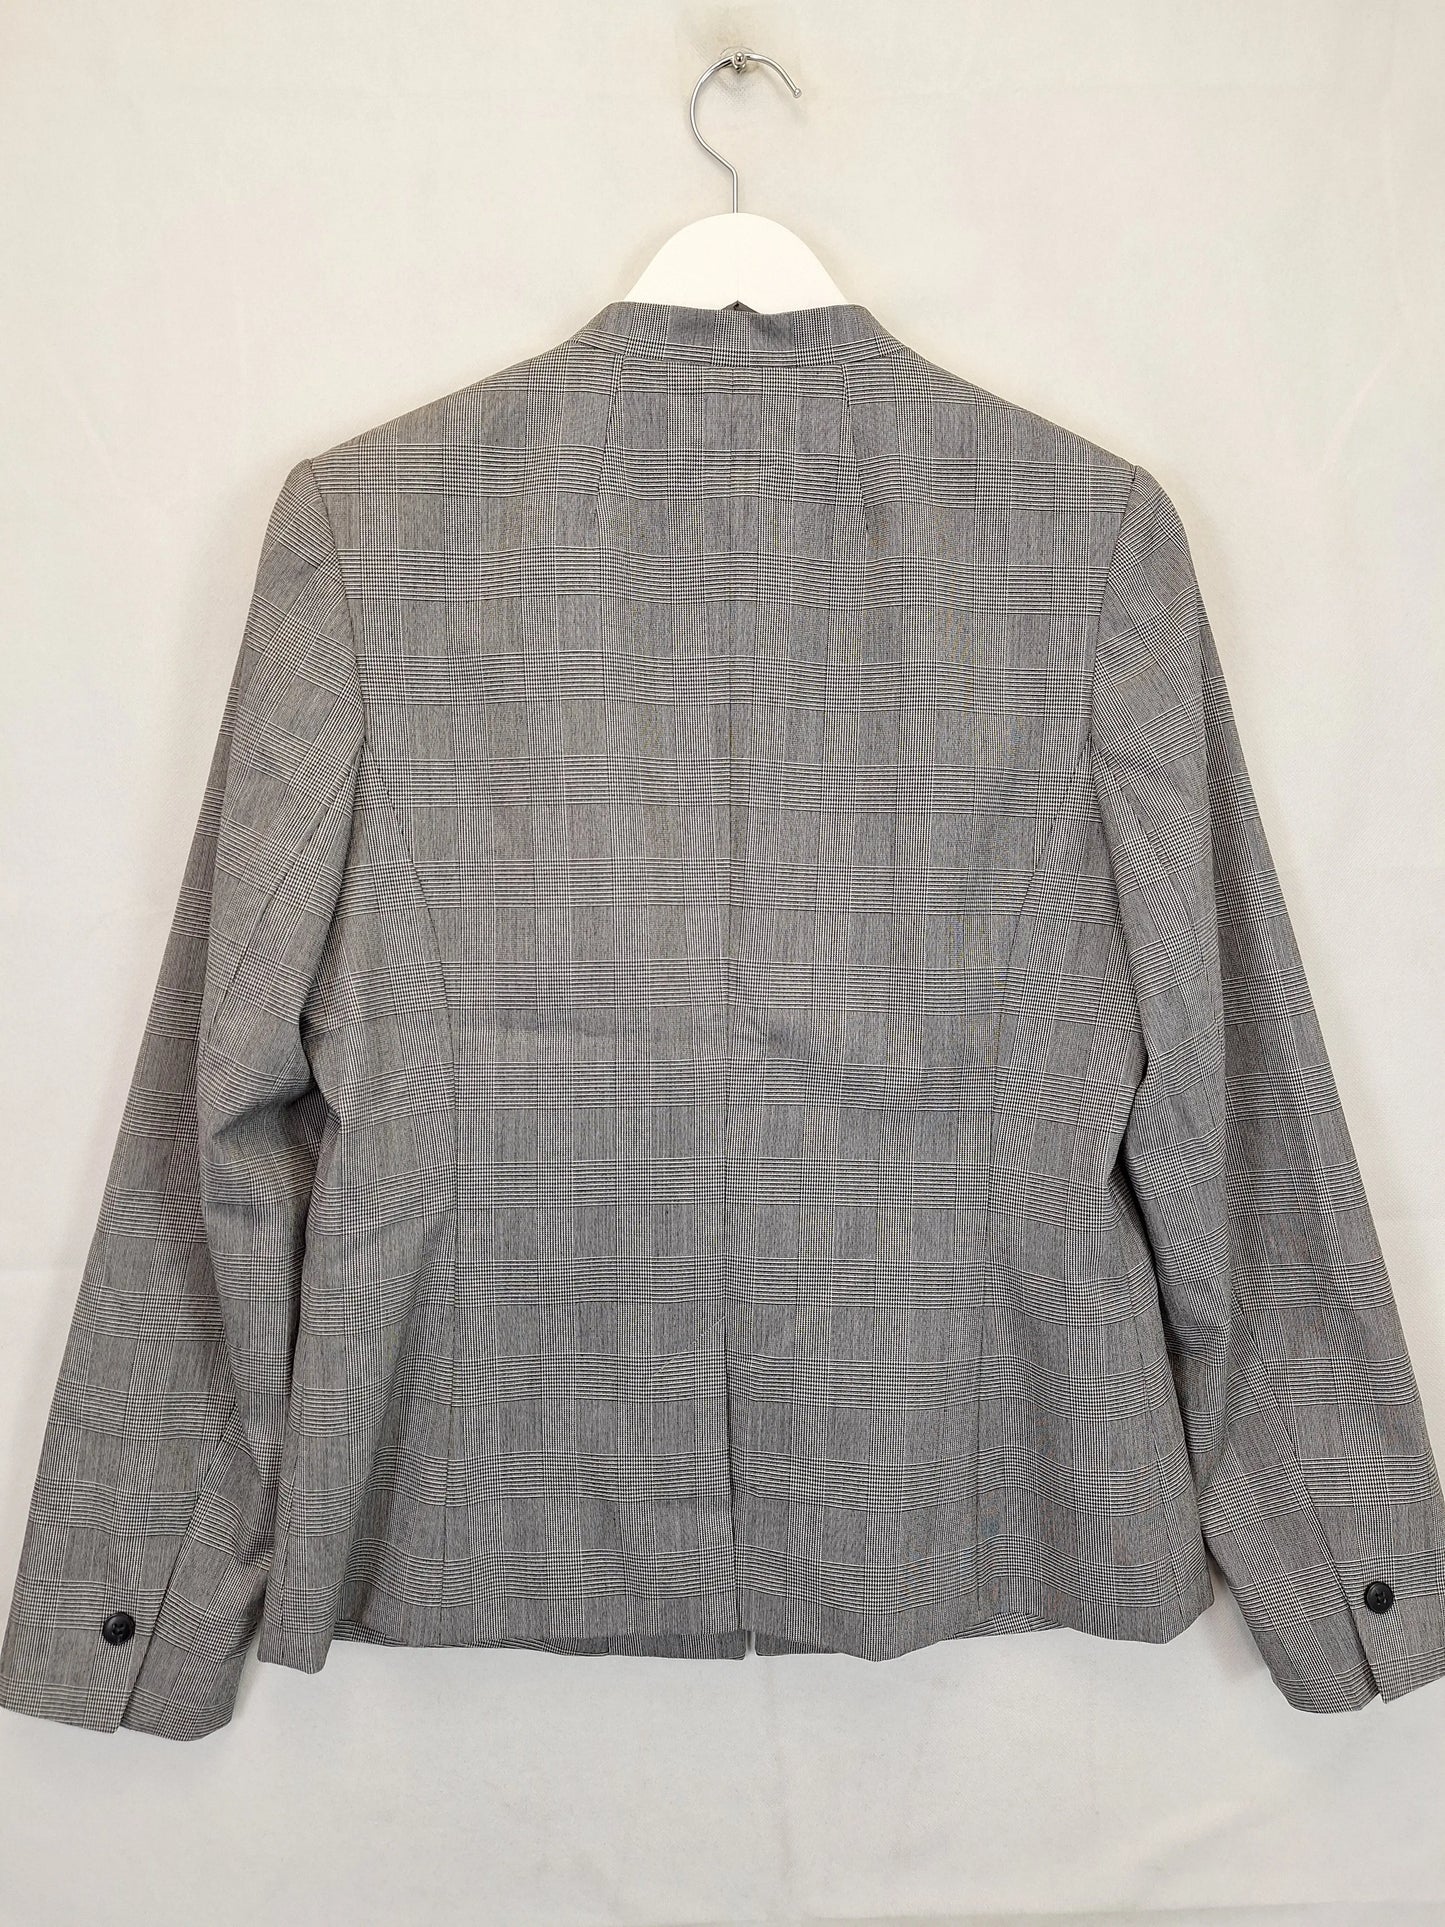 Basque Tailored Check Blazer Size 12 by SwapUp-Online Second Hand Store-Online Thrift Store